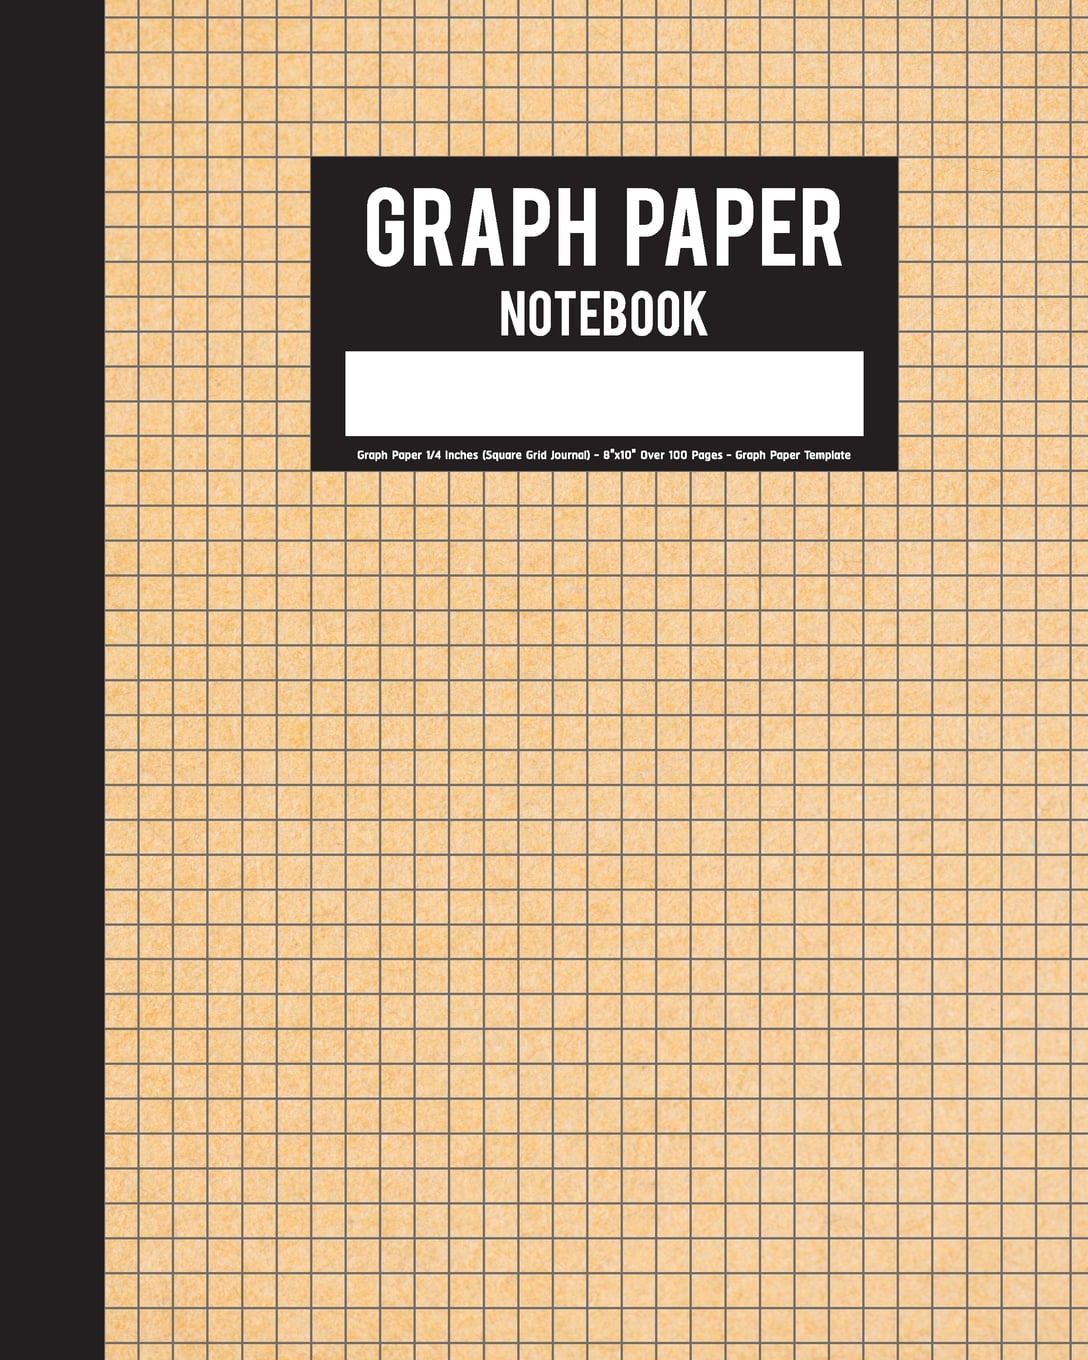 1 inch grid paper template